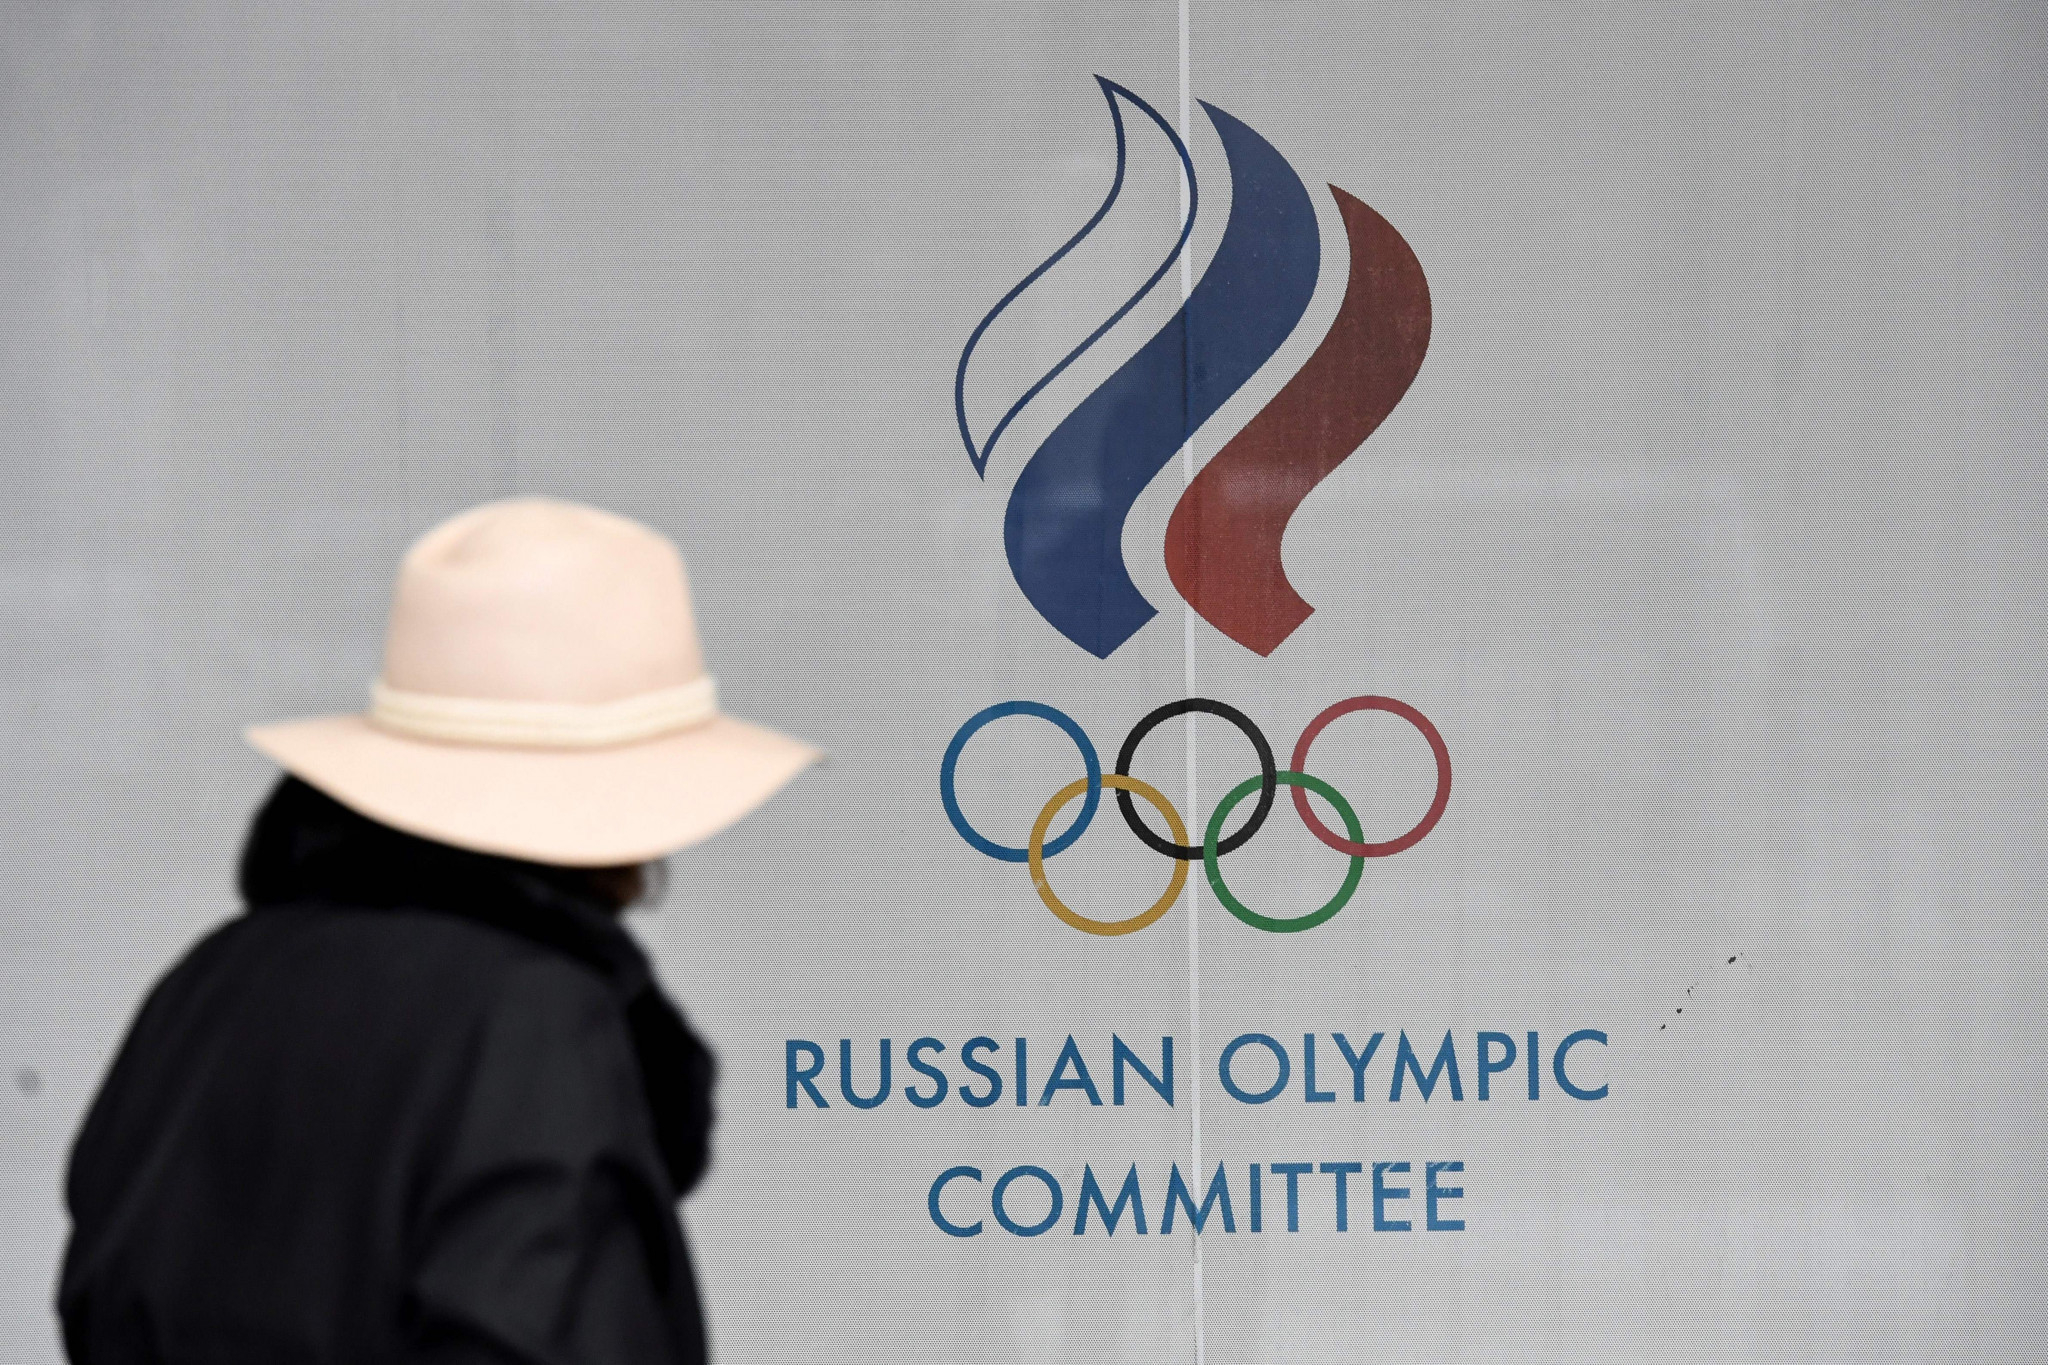 Russian Olympic Committee has compensation payments for 245 athletes who will be absent from the Paris Games. GETTY IMAGES